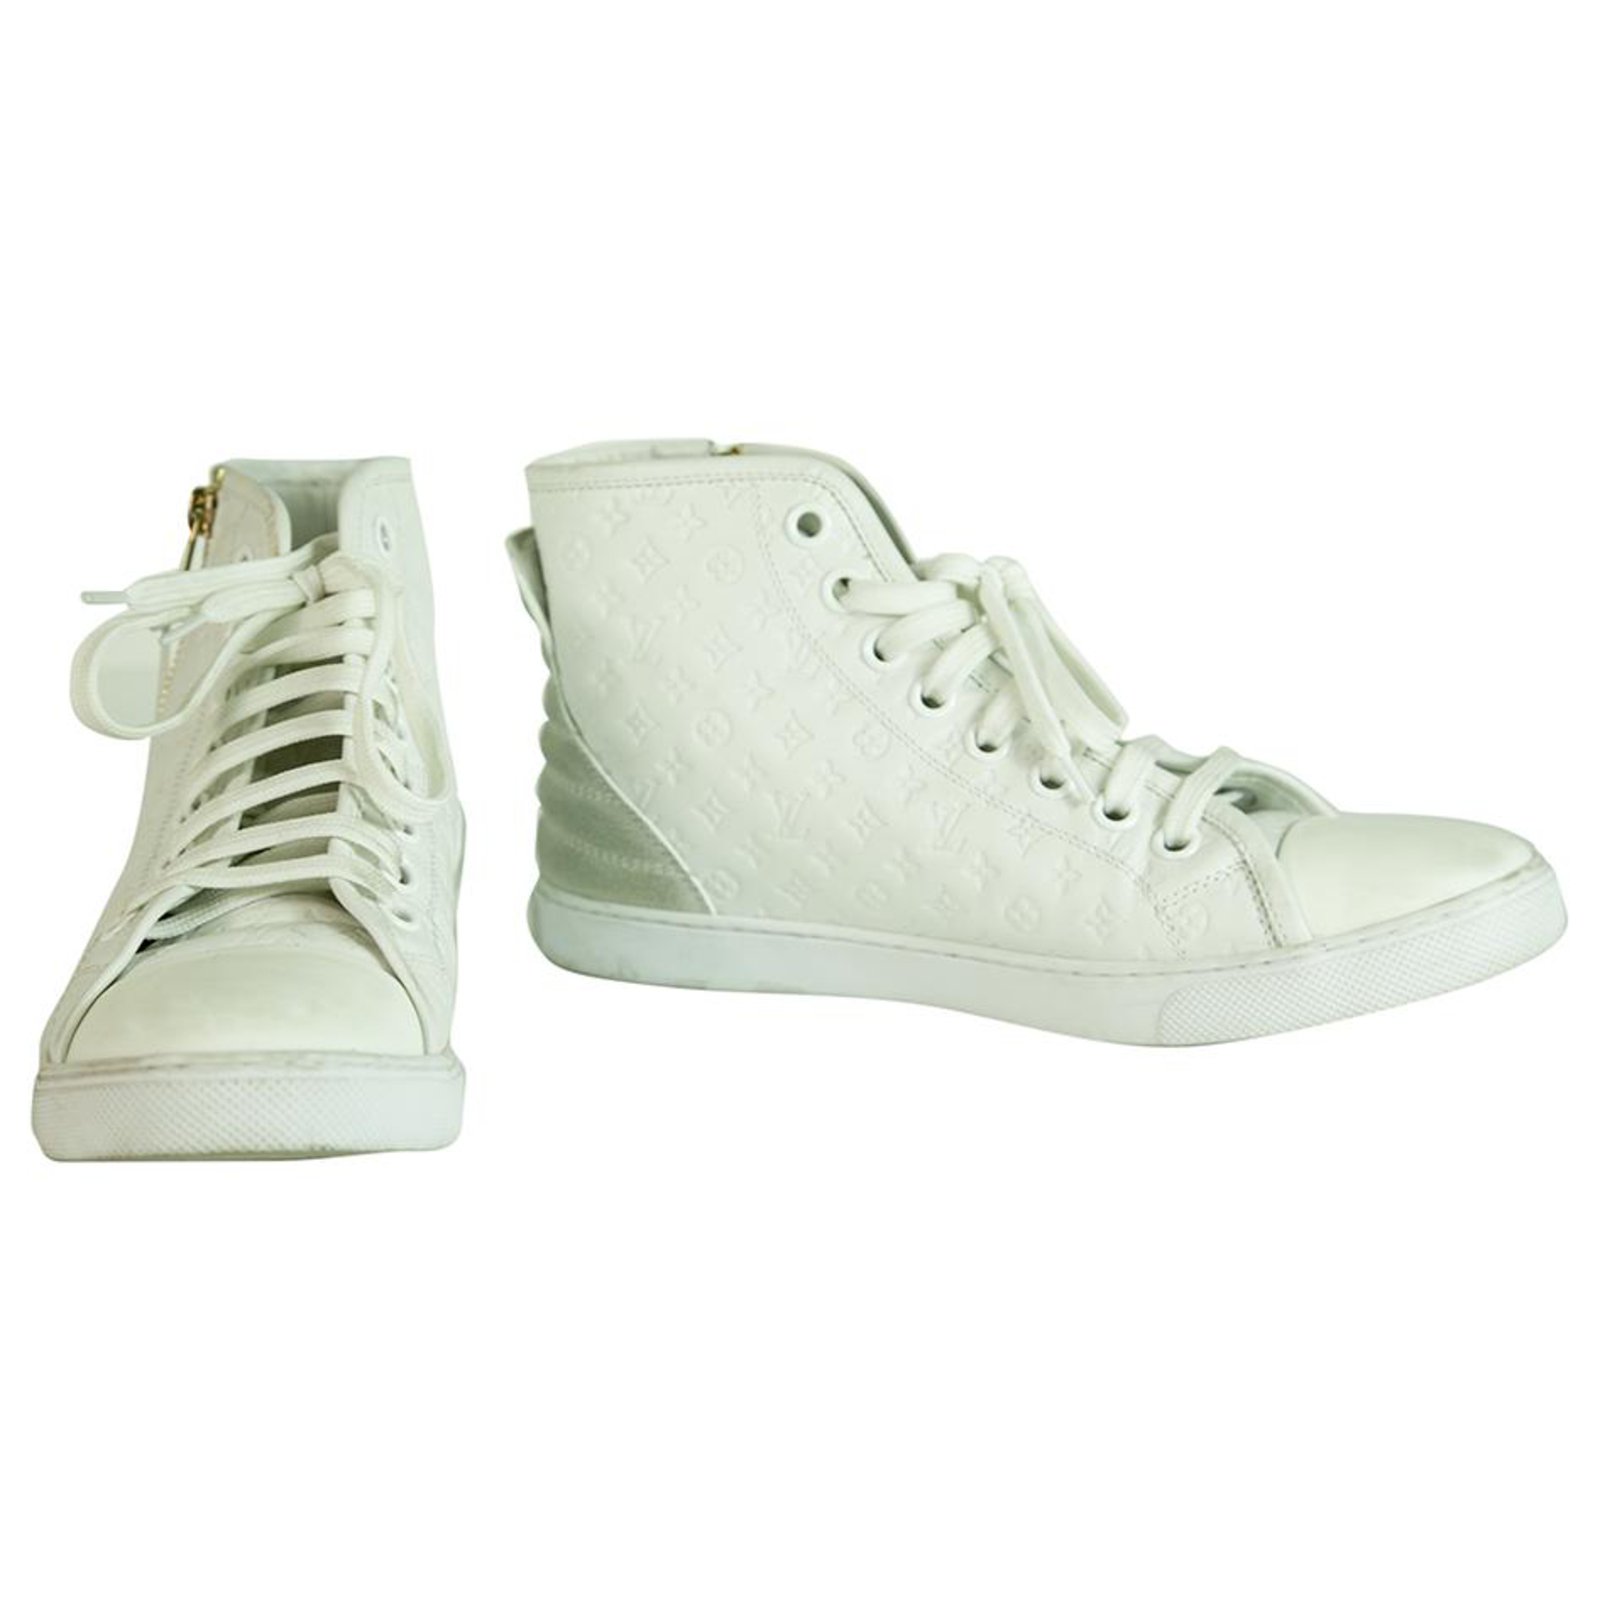 Louis Vuitton White Leather Frontrow Lace Up Sneakers Size 37 Louis Vuitton